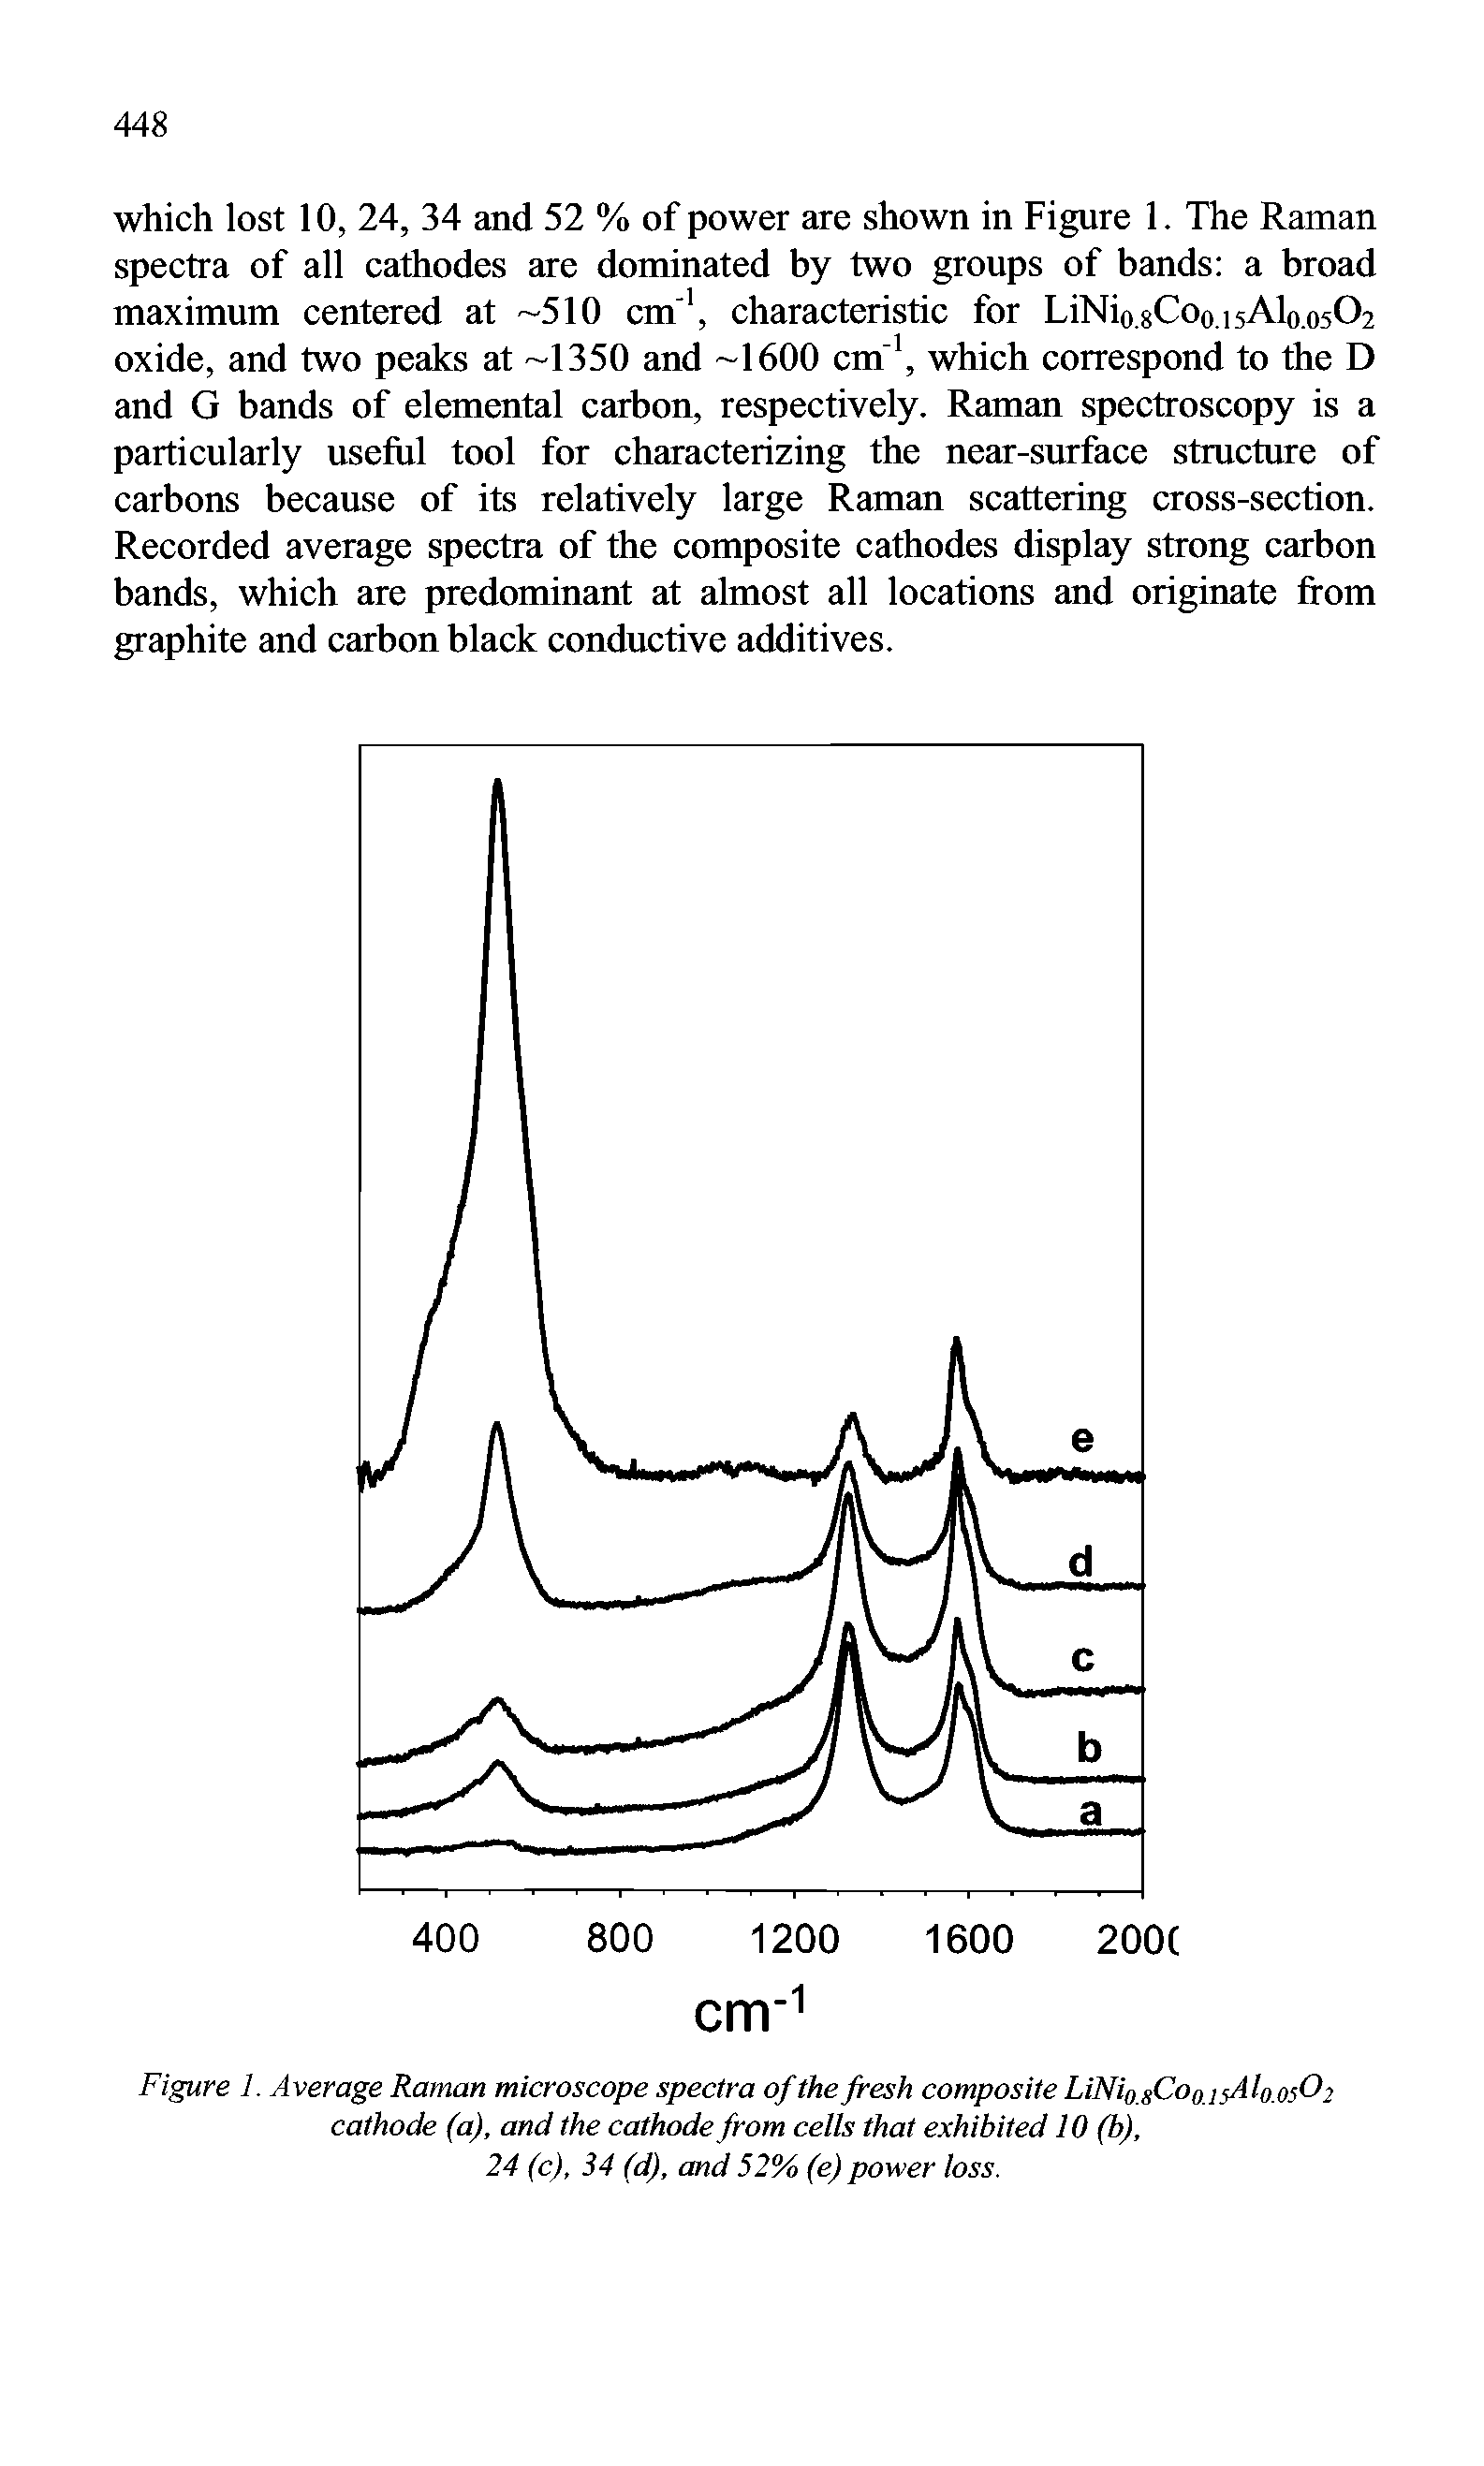 Figure 1. Average Raman microscope spectra of the fresh composite LiNio.sCoonAlo.05O2 cathode (a), and the cathode from cells that exhibited 10 (b),...